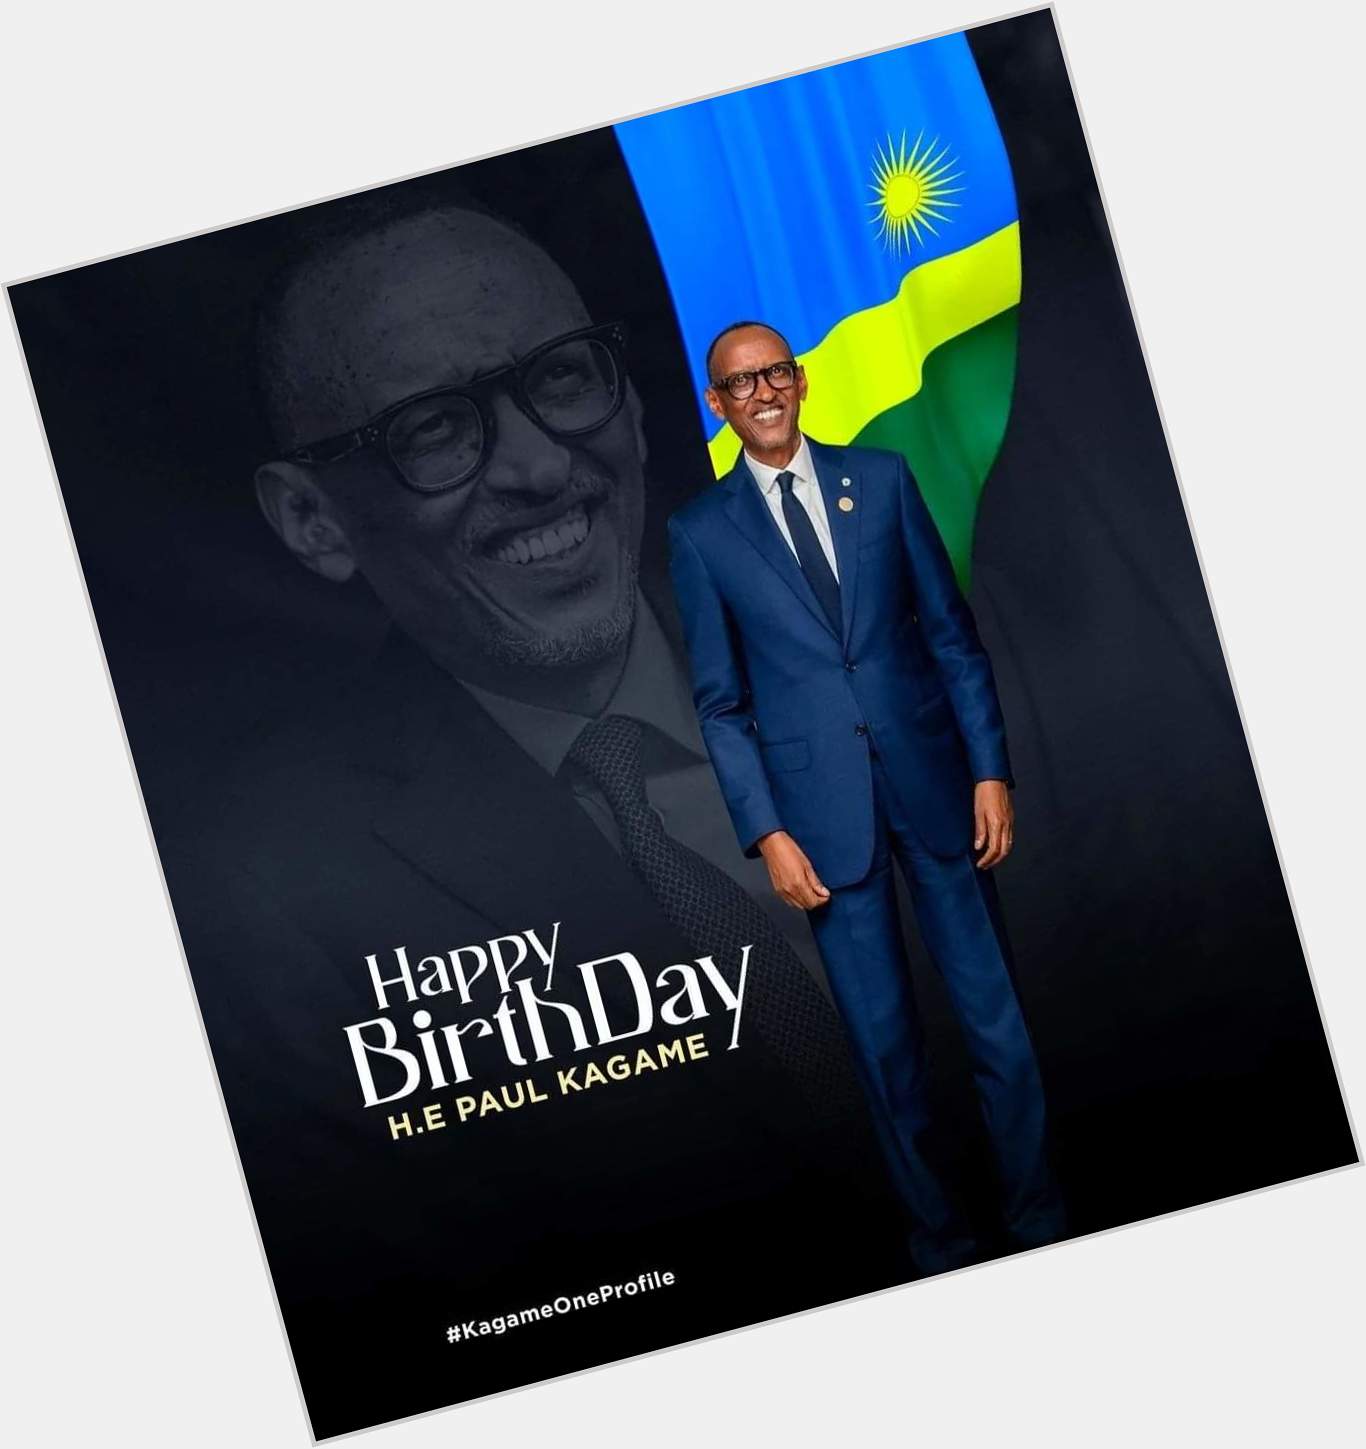 Happy birthday your Excellence Paul Kagame president of the Republic of Rwanda!! Imana ikurinde. 